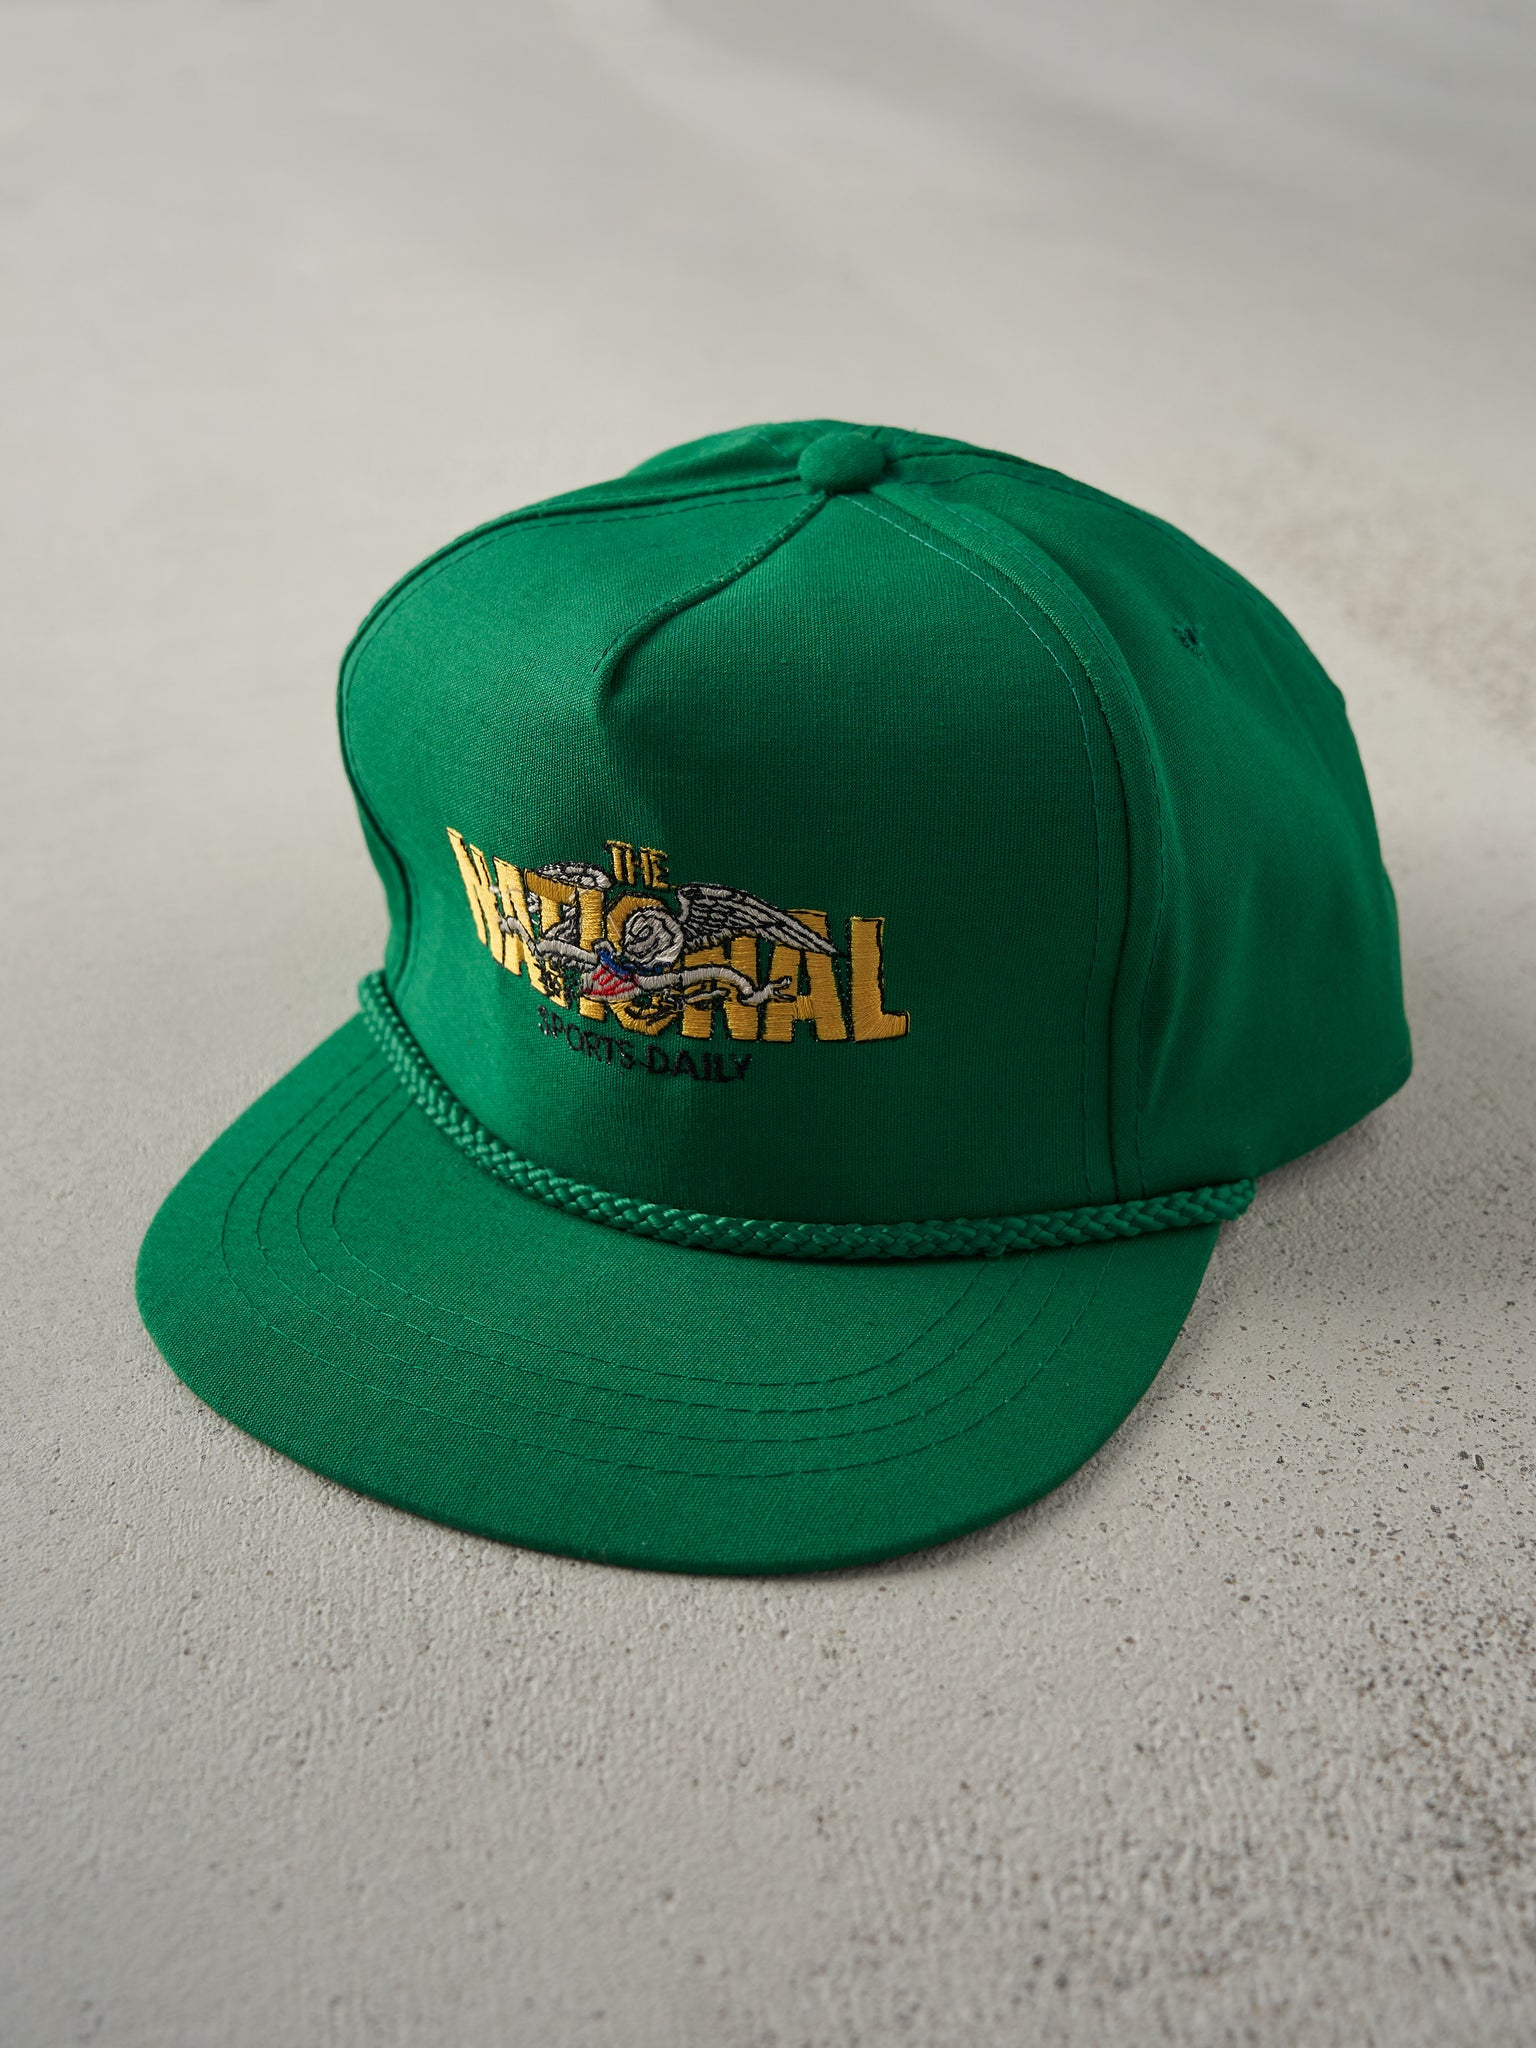 Vintage 80s Green Embroidered The National Sports Daily Snapback Hat